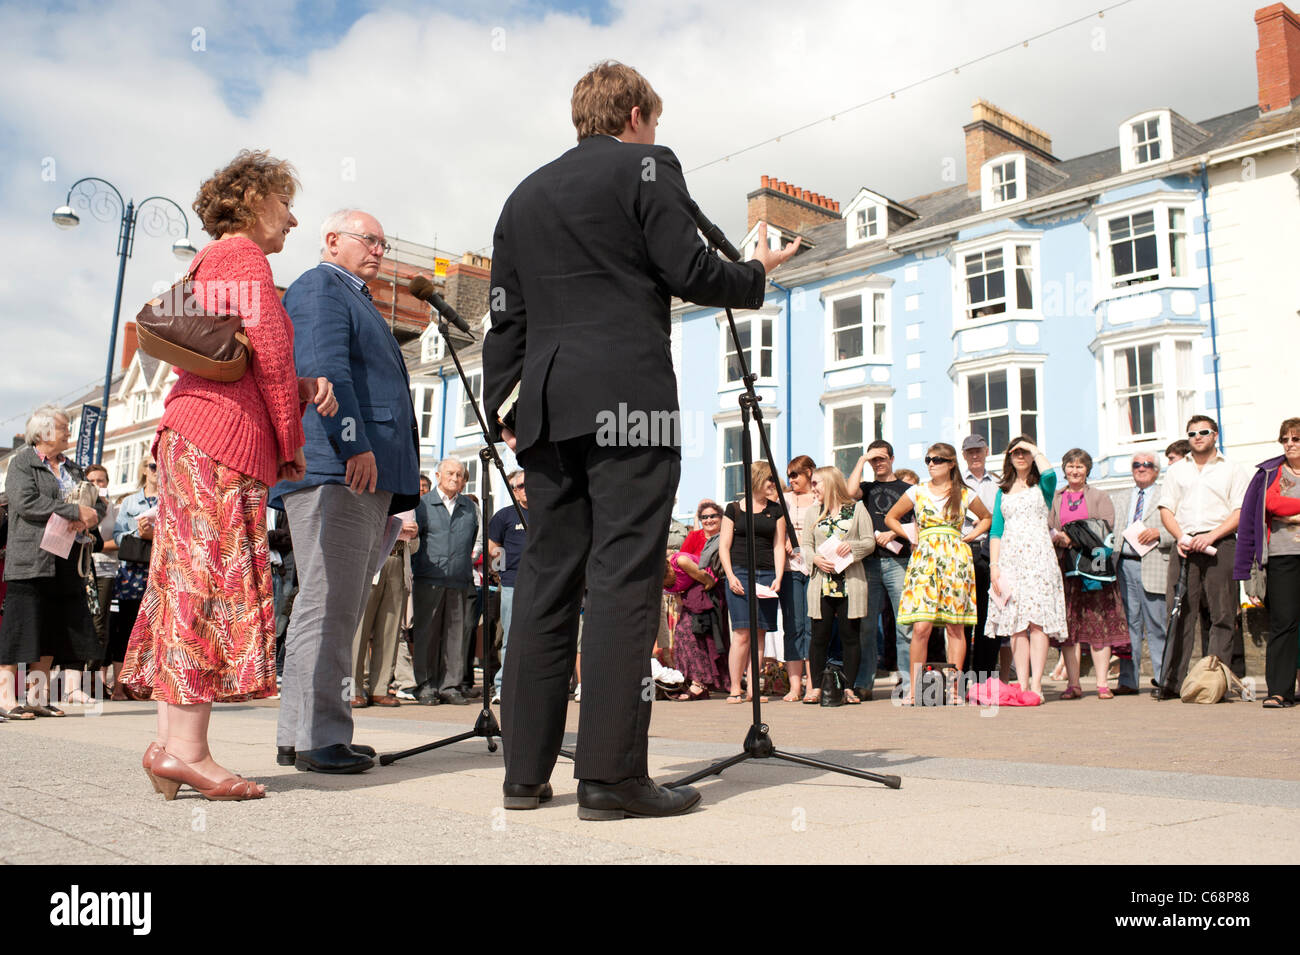 A man addressing an Evangelical Christian outdoor worship service on the promenade at Aberystwyth Wales UK Stock Photo